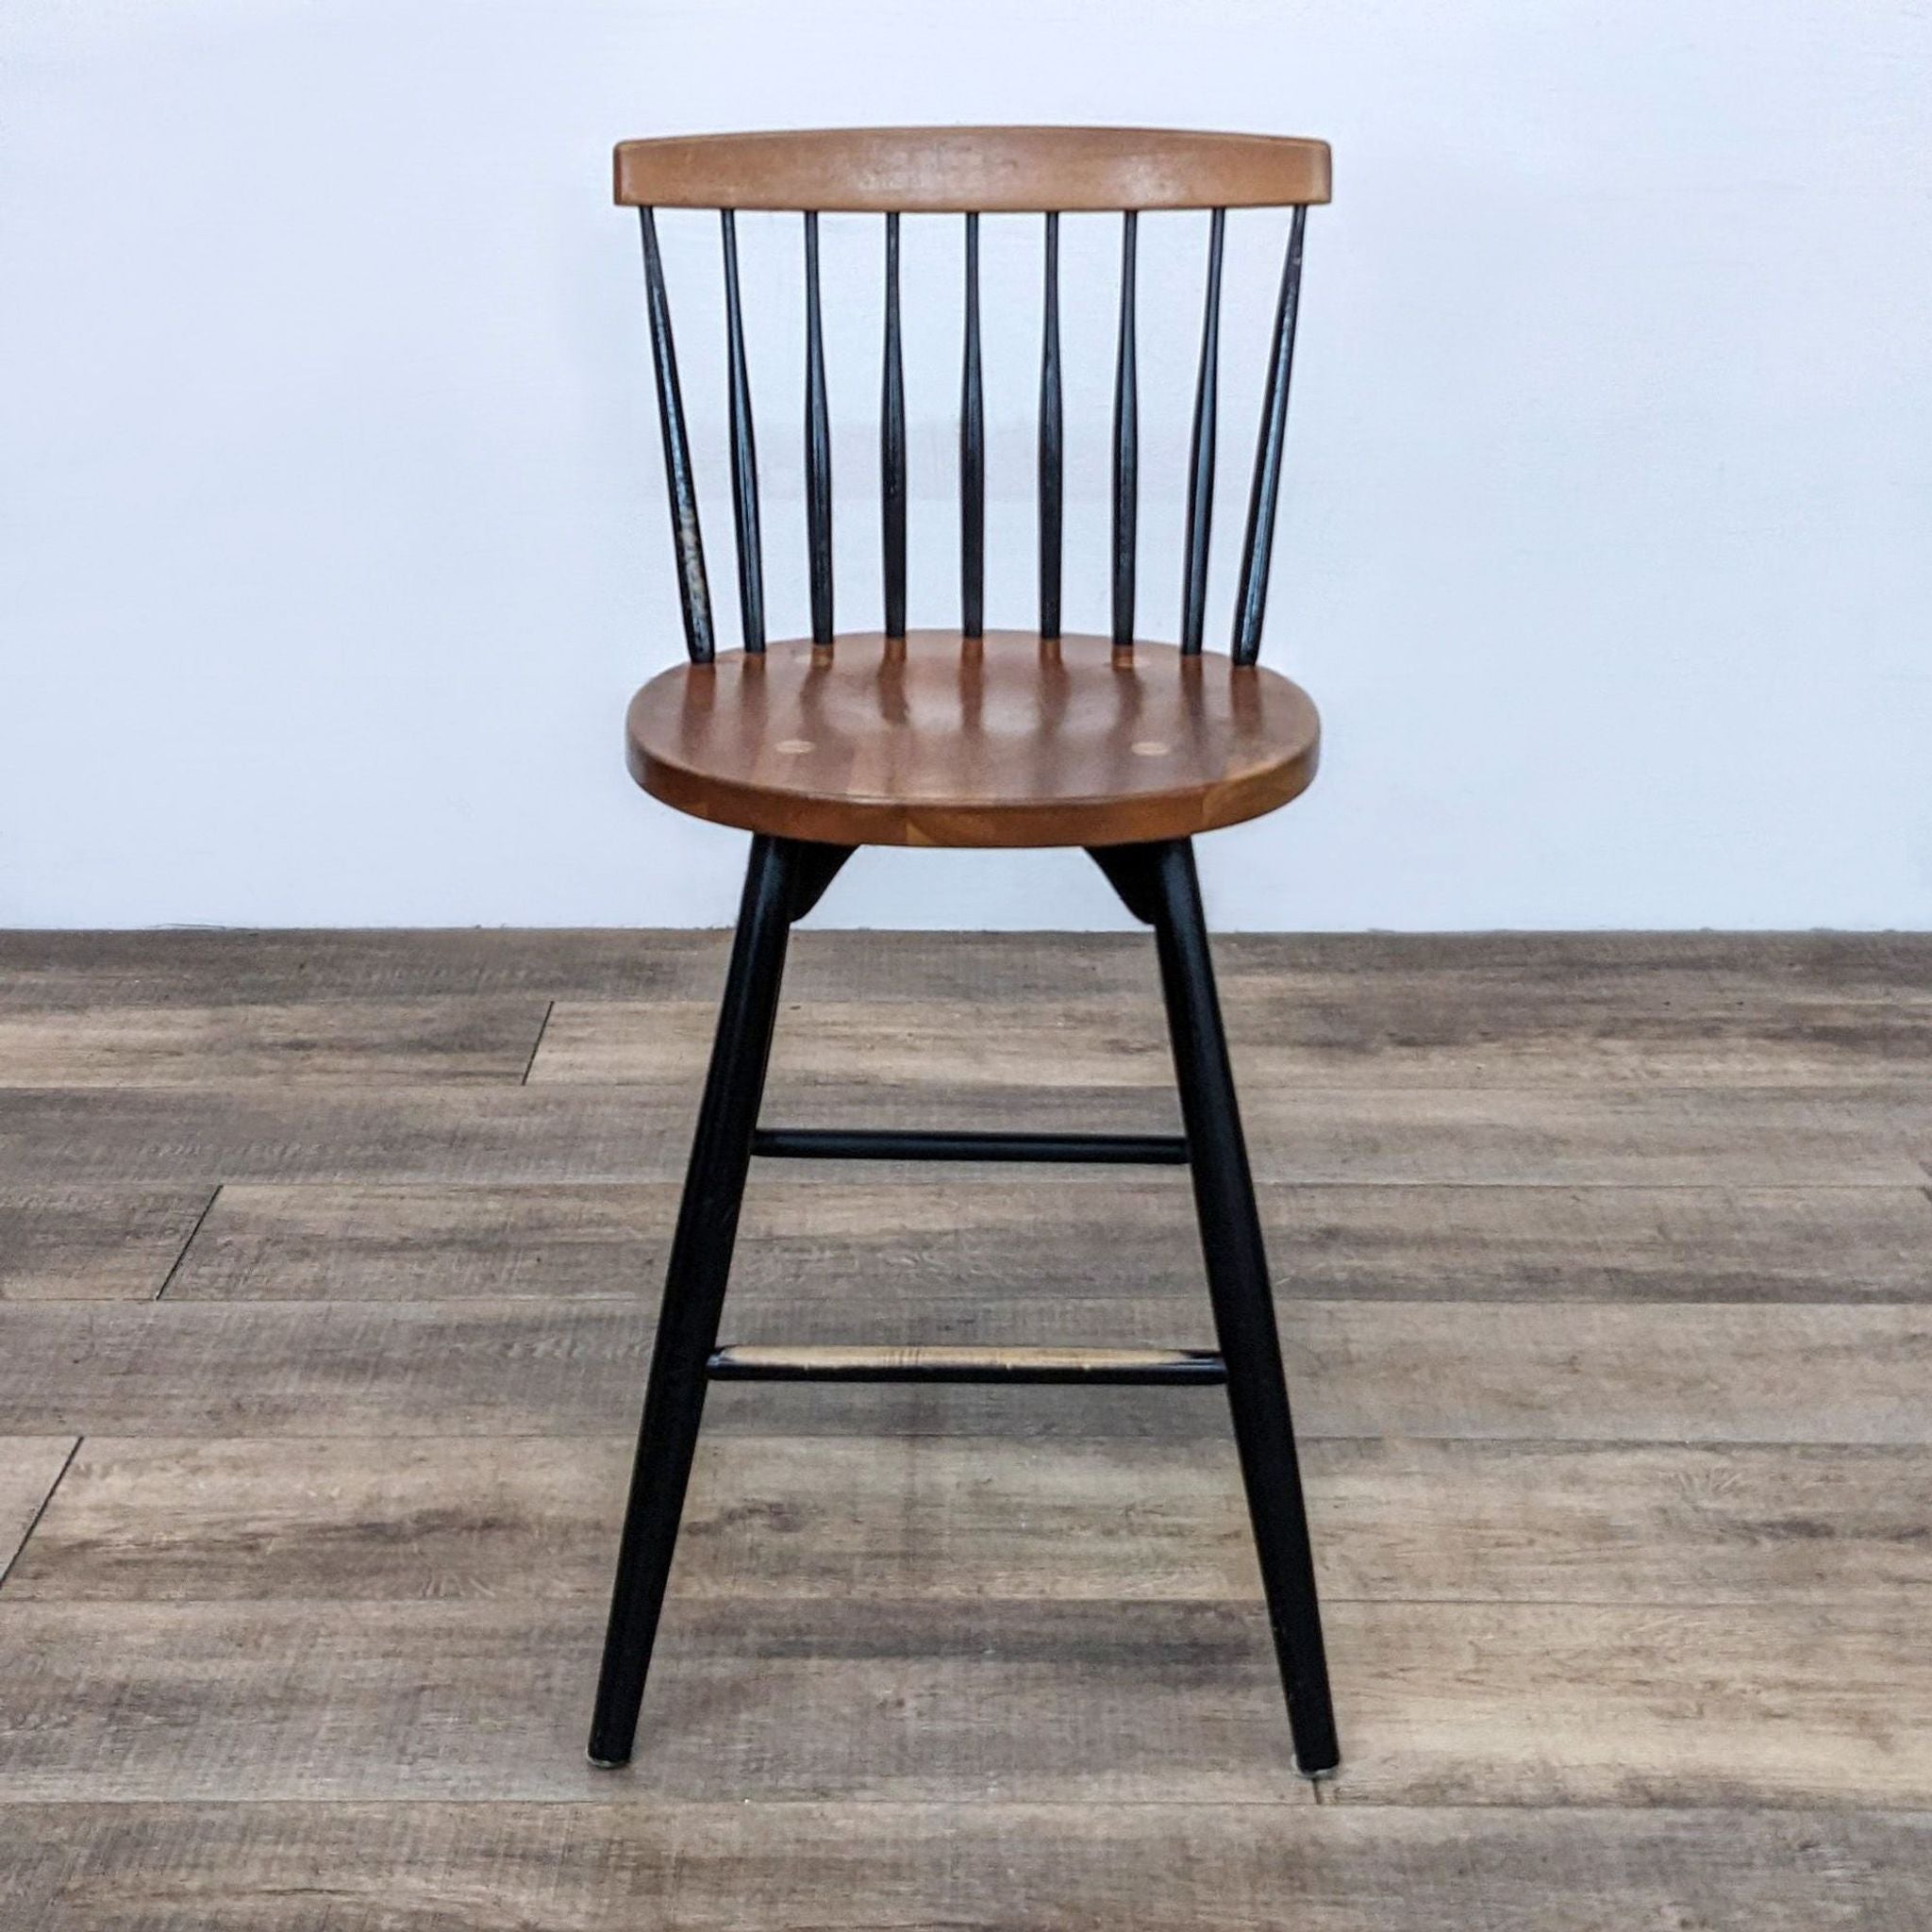 Handcrafted two-tone barstool with sturdy back support by W.A. Mitchell Chairmakers, designed for elevated seating.